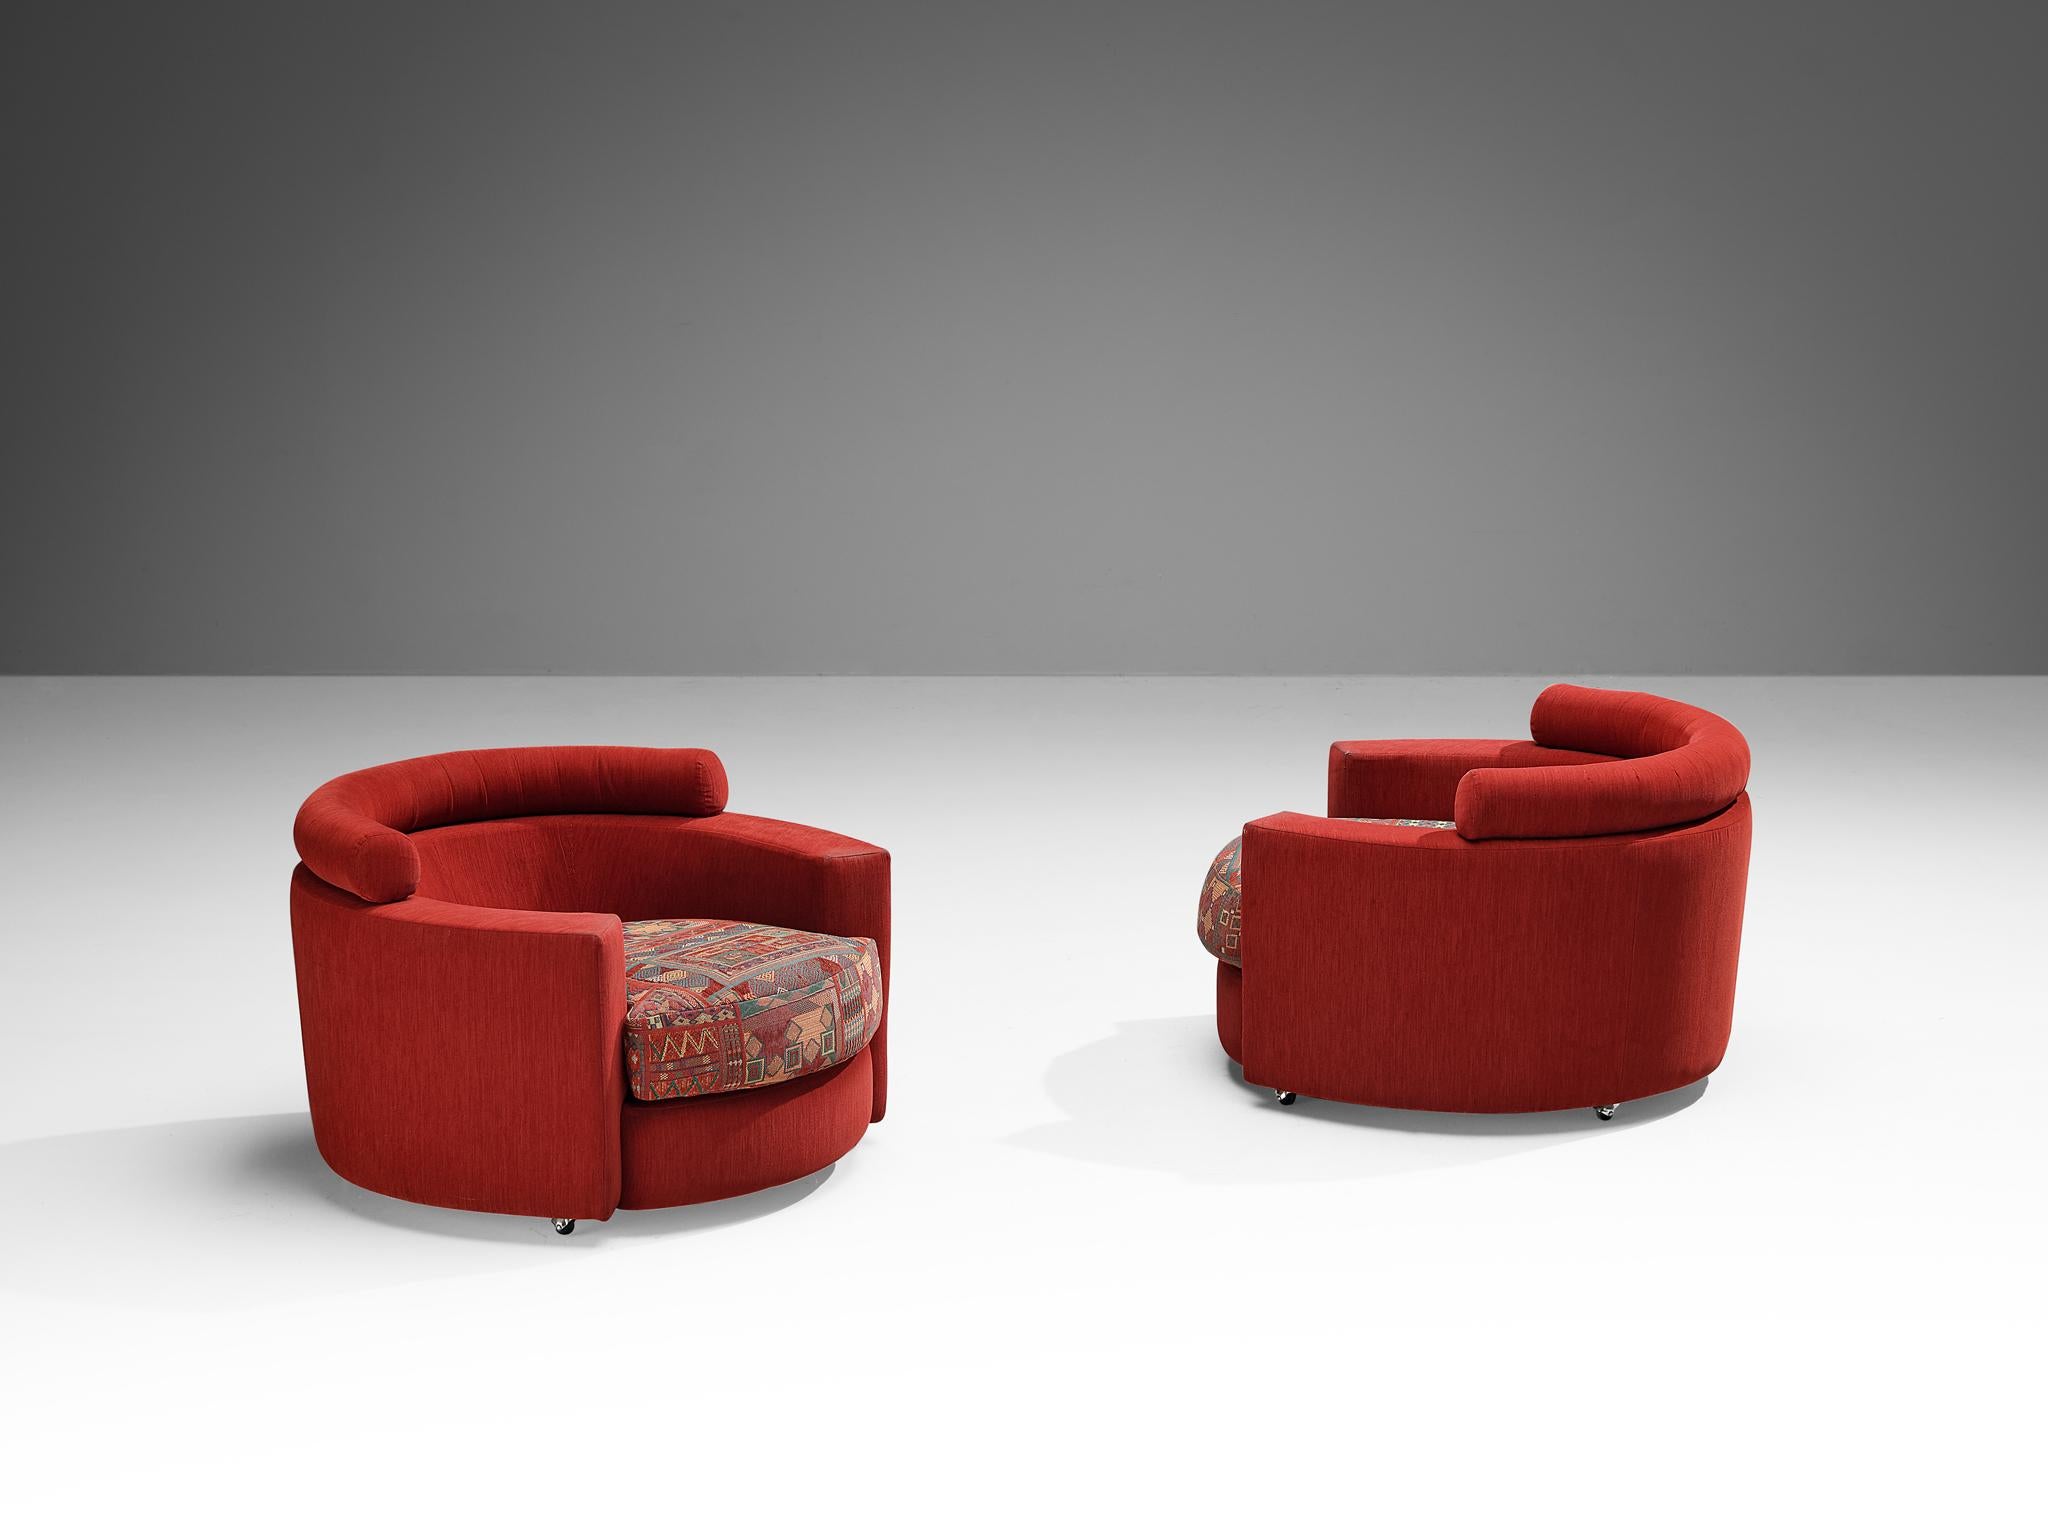 Post-Modern Roche Bobois Pair of Lounge Chairs in Red and Patterned Upholstery For Sale